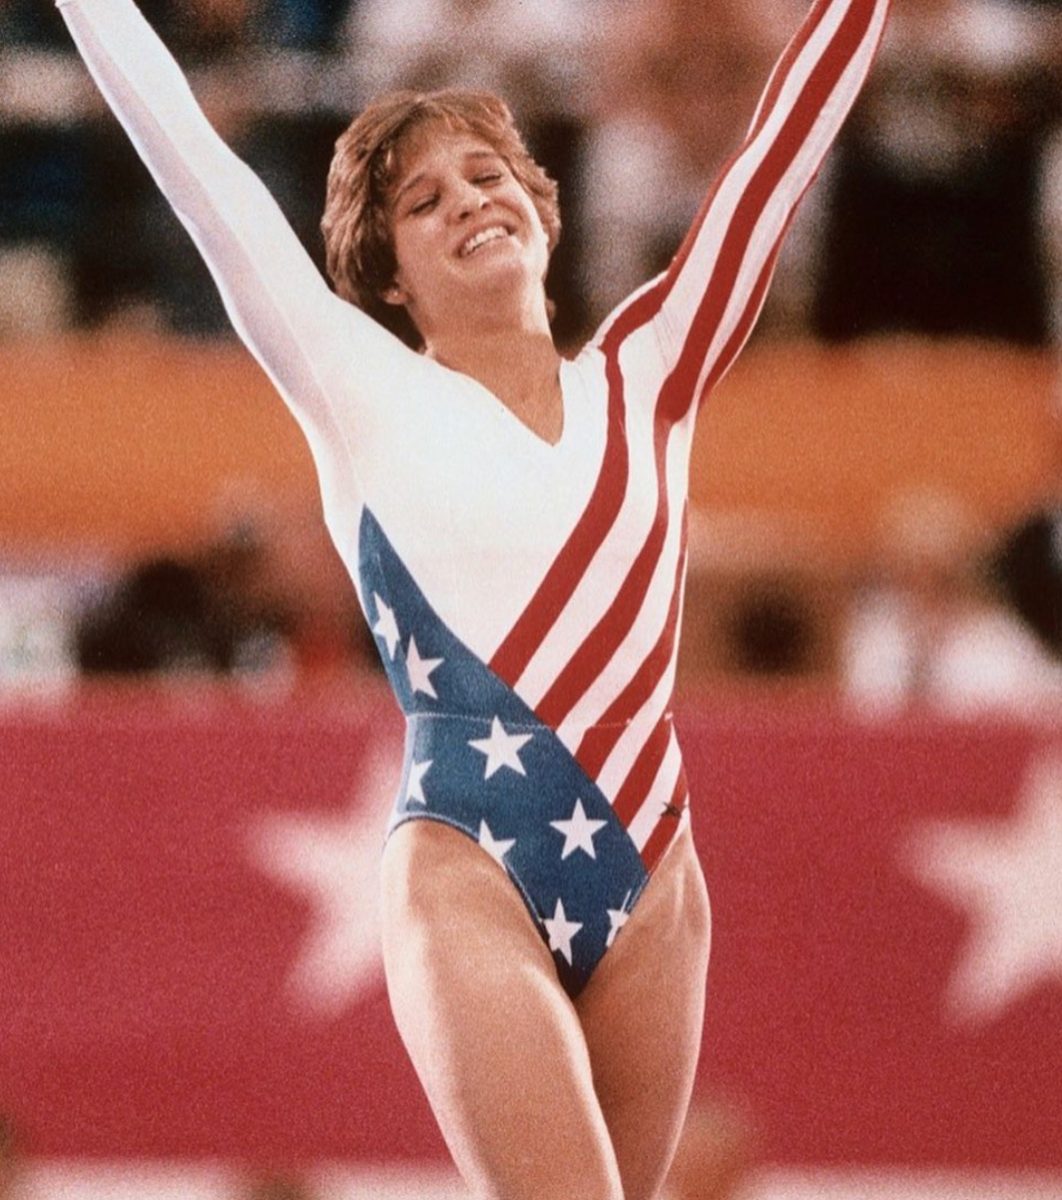 Major Update About Mary Lou Retton's Health Battle | Update: October 23, 2023: Just four days after it was revealed that Mary Lou Retton had suffered a scary setback, a miracle has occurred.